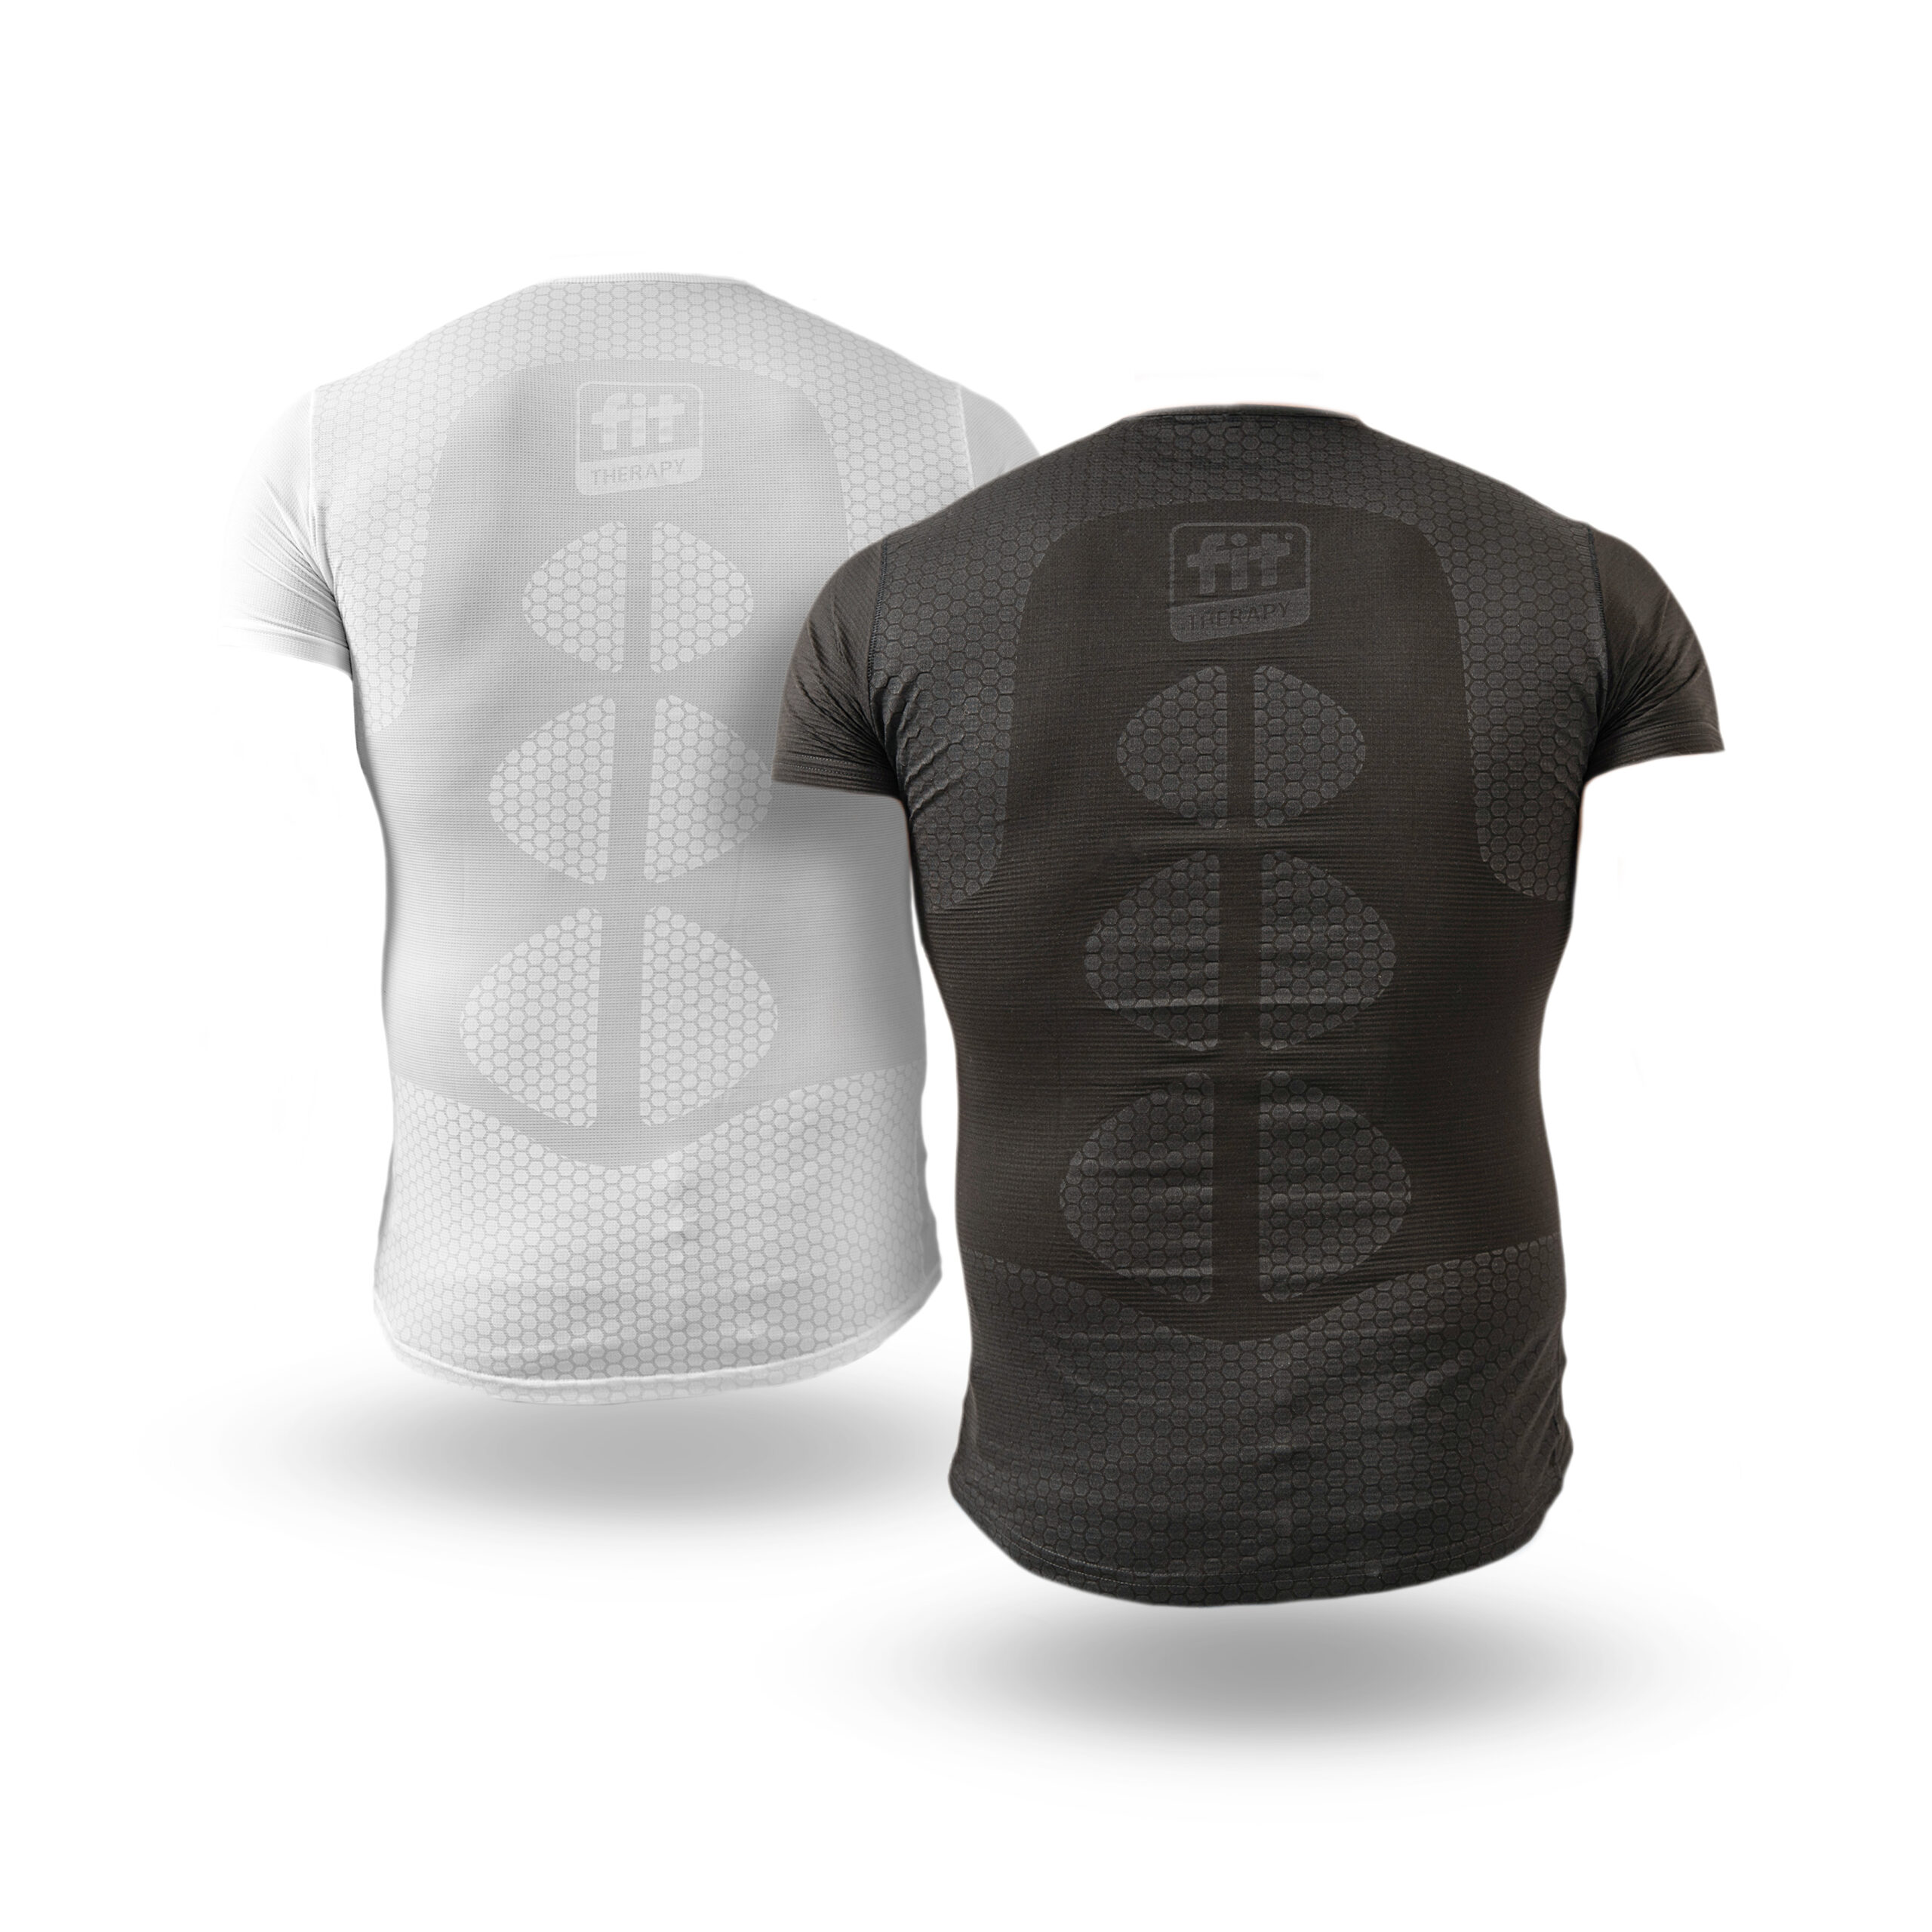 FIT-Shirt - FIT THERAPY WEAR